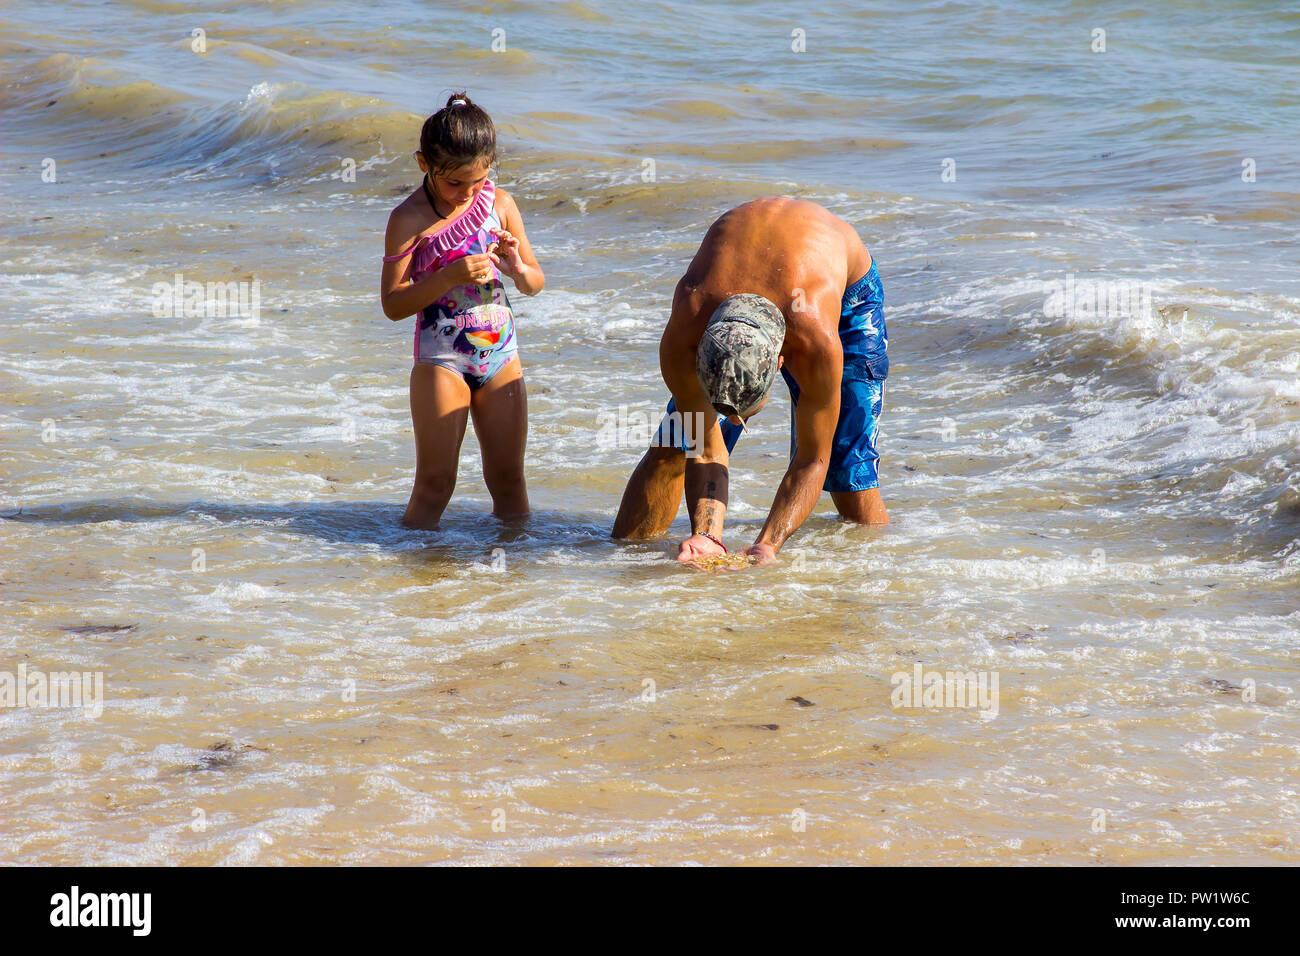 29 September 2018 A father and young daughter play together in the surf on a beach in Albuferia on the Algarve inPortugal on a beautiful sunny afterno Stock Photo